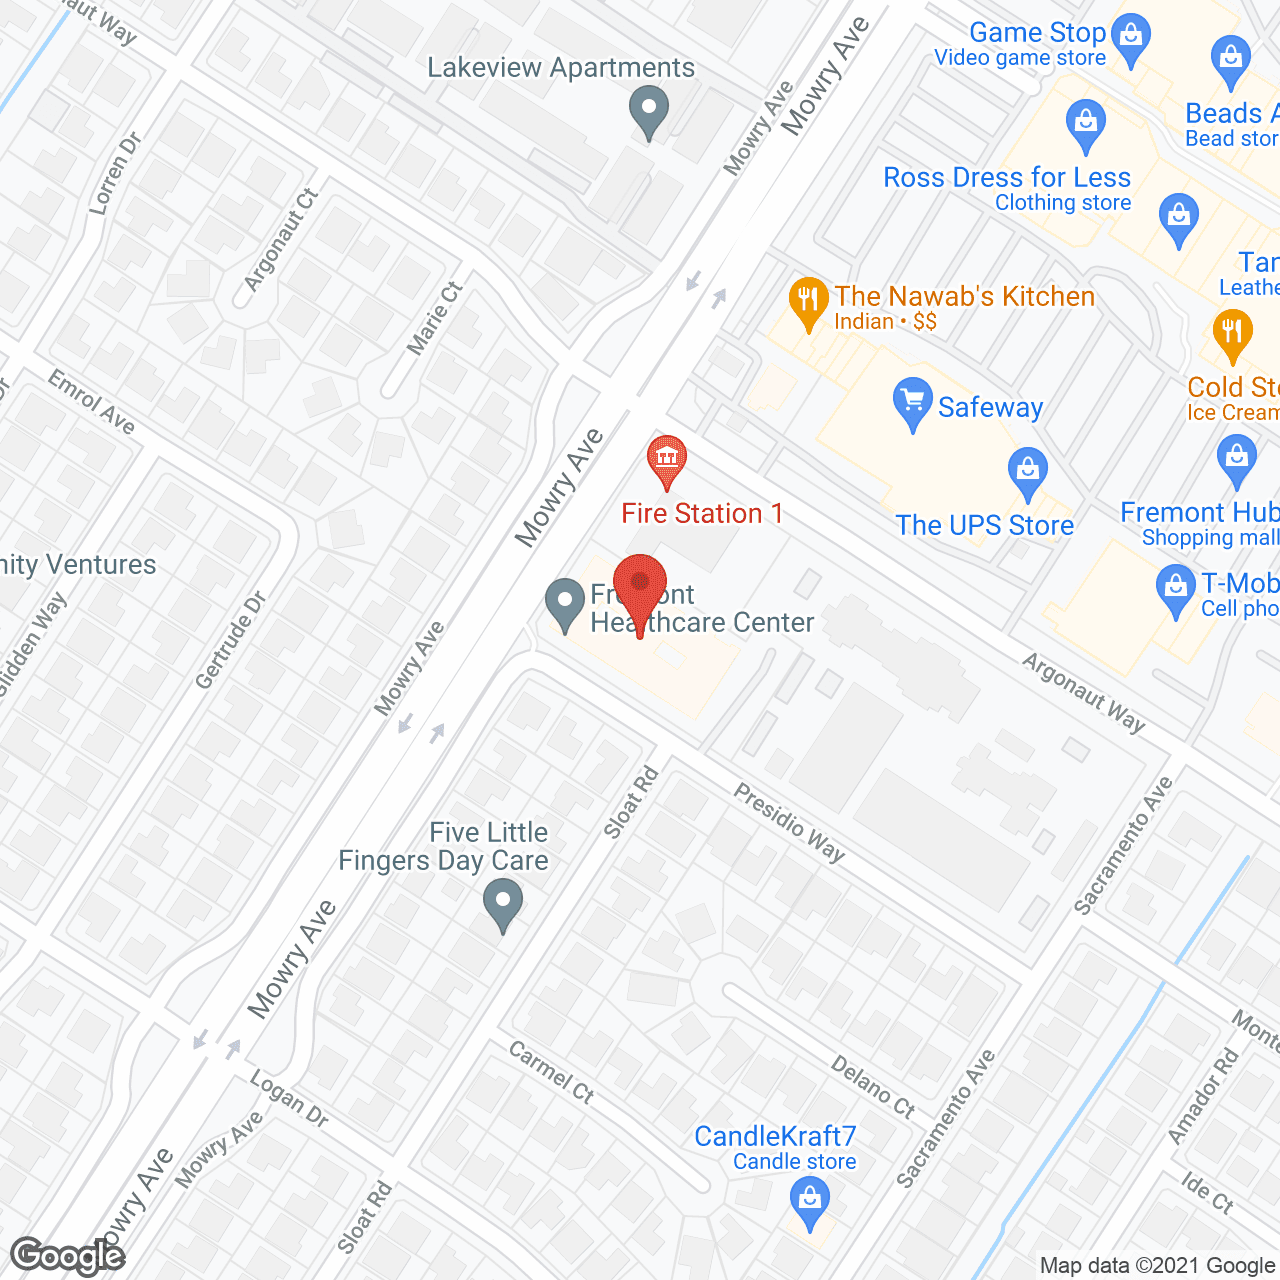 Fremont Healthcare Ctr in google map